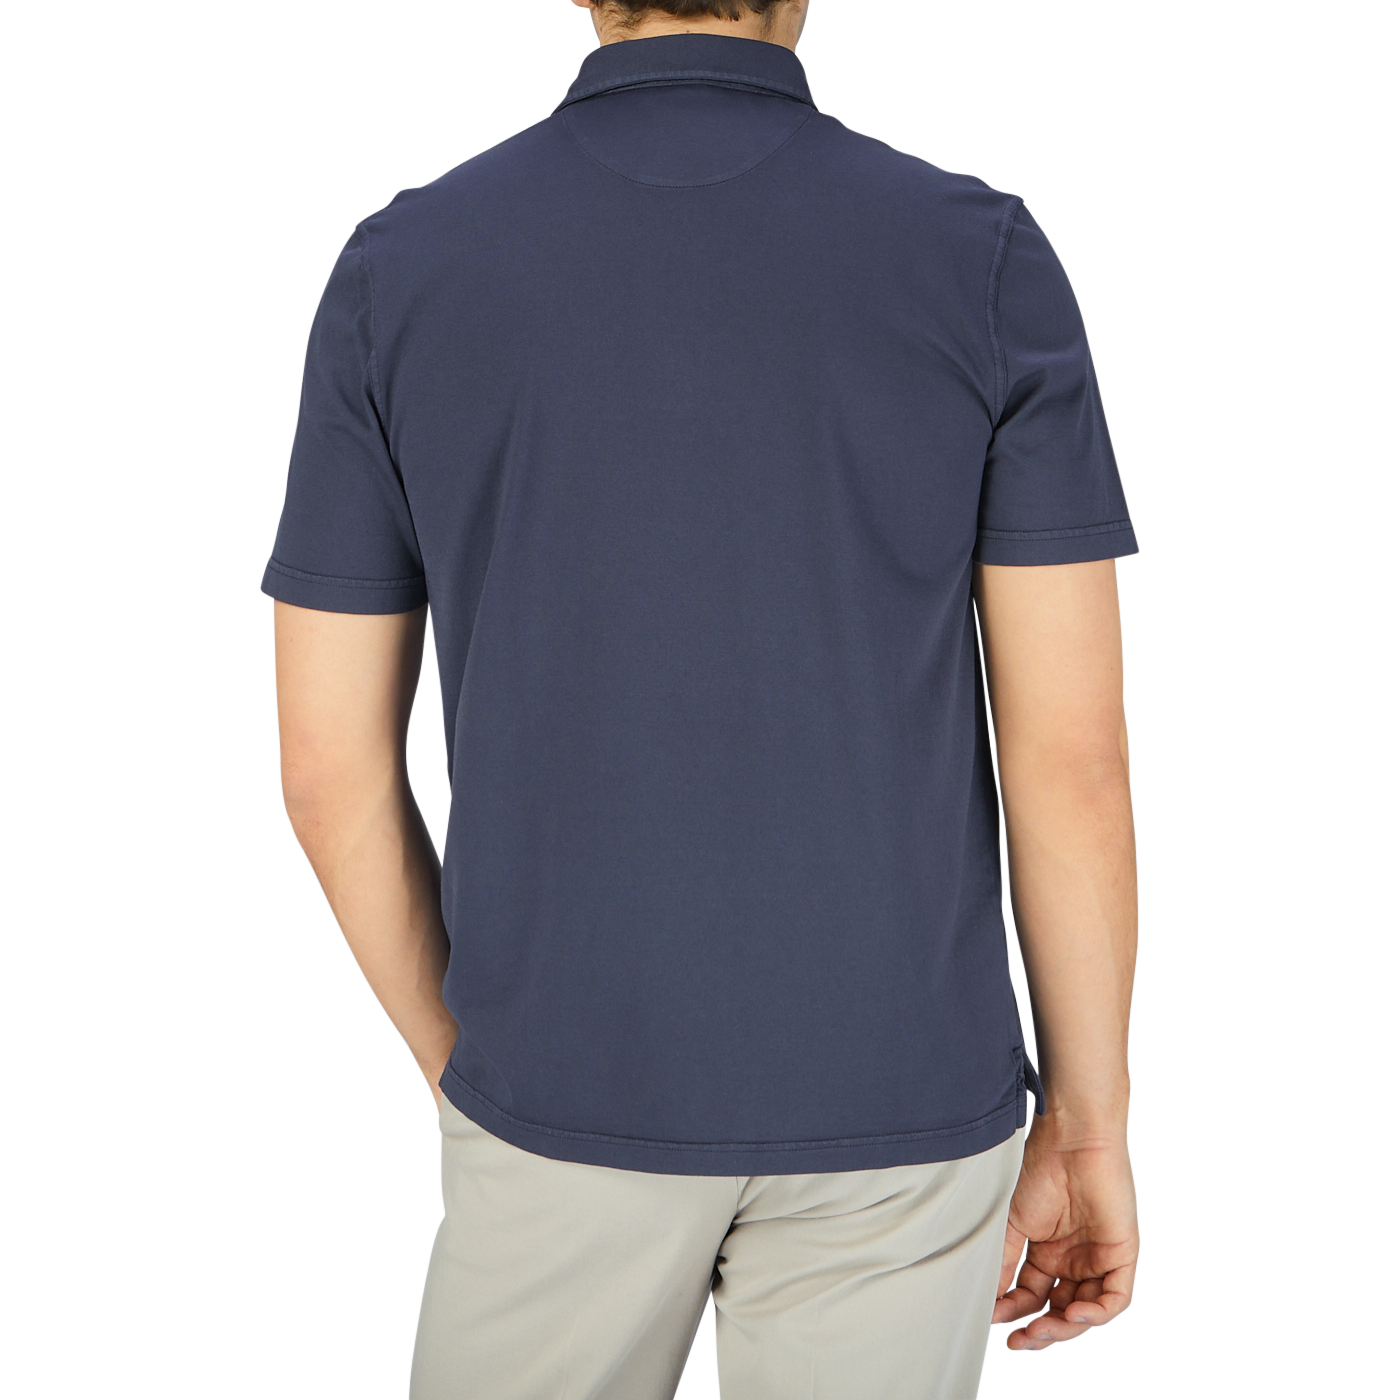 The back view of a man wearing a Fedeli Navy Blue Organic Cotton Polo Shirt.